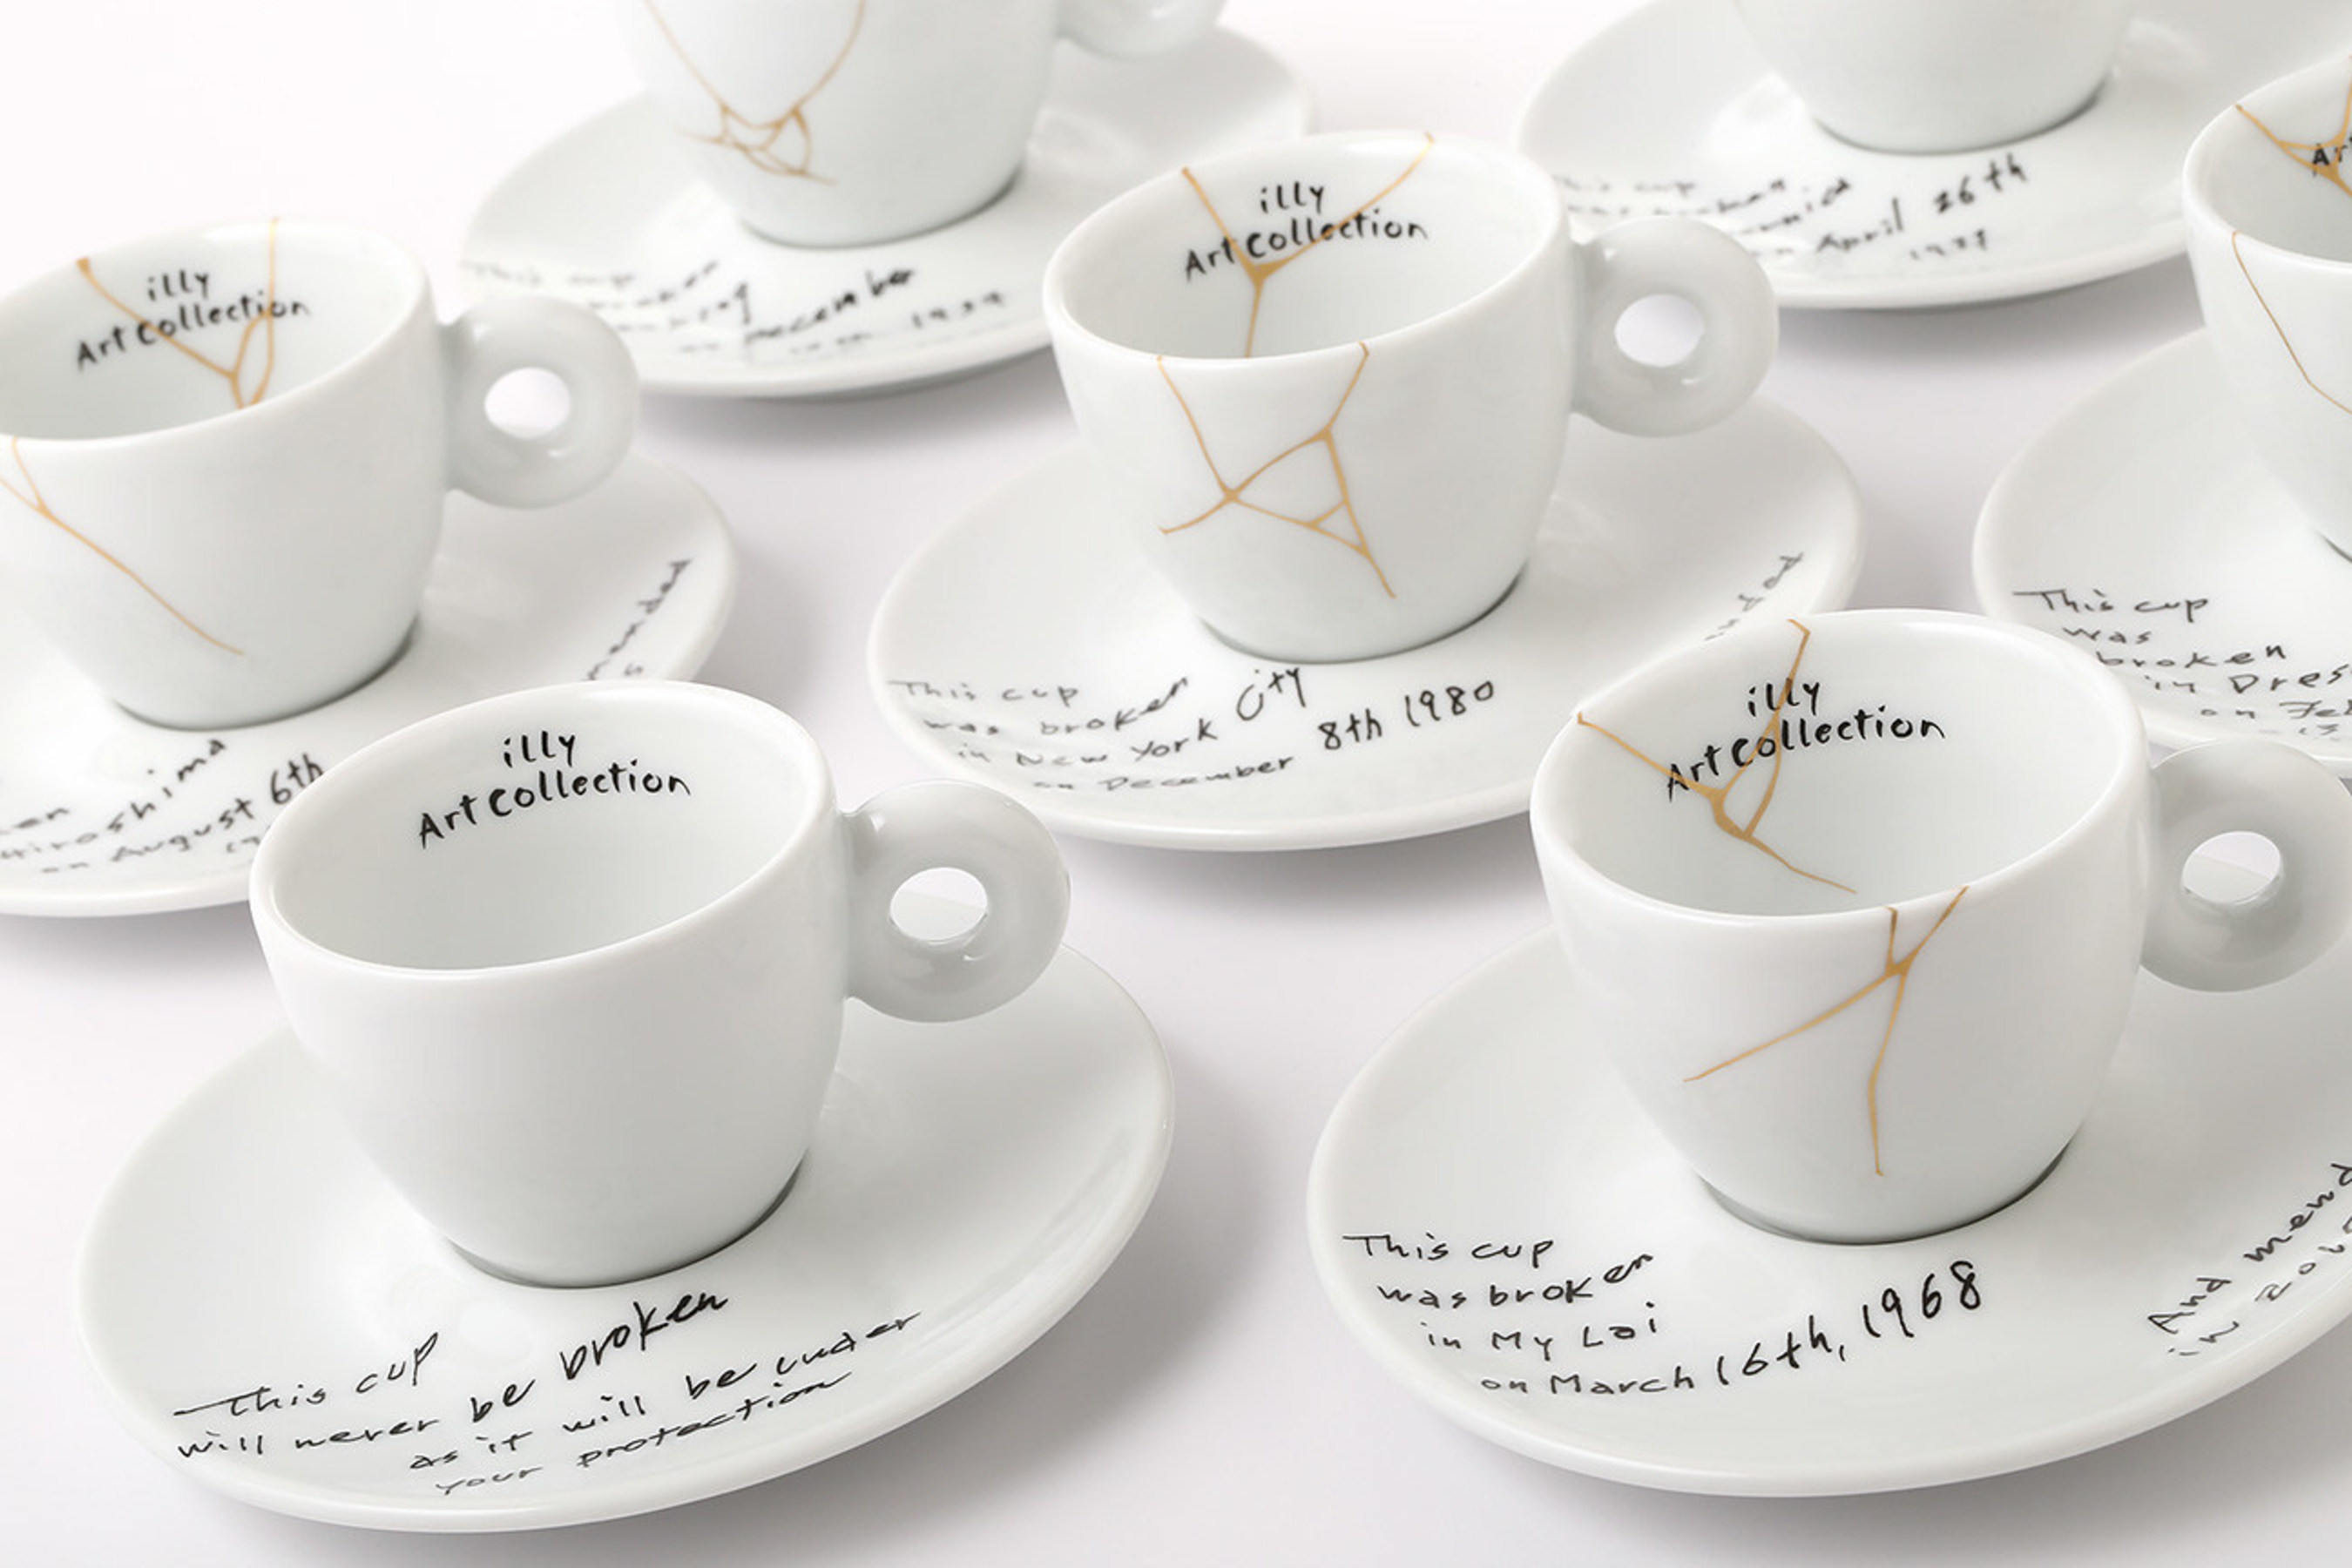 Yoko Ono: Mended Cups - illy Art Collection. *Image provided by illy North America showing the newest collaboration for the illy Art Collection of espresso cups and saucers